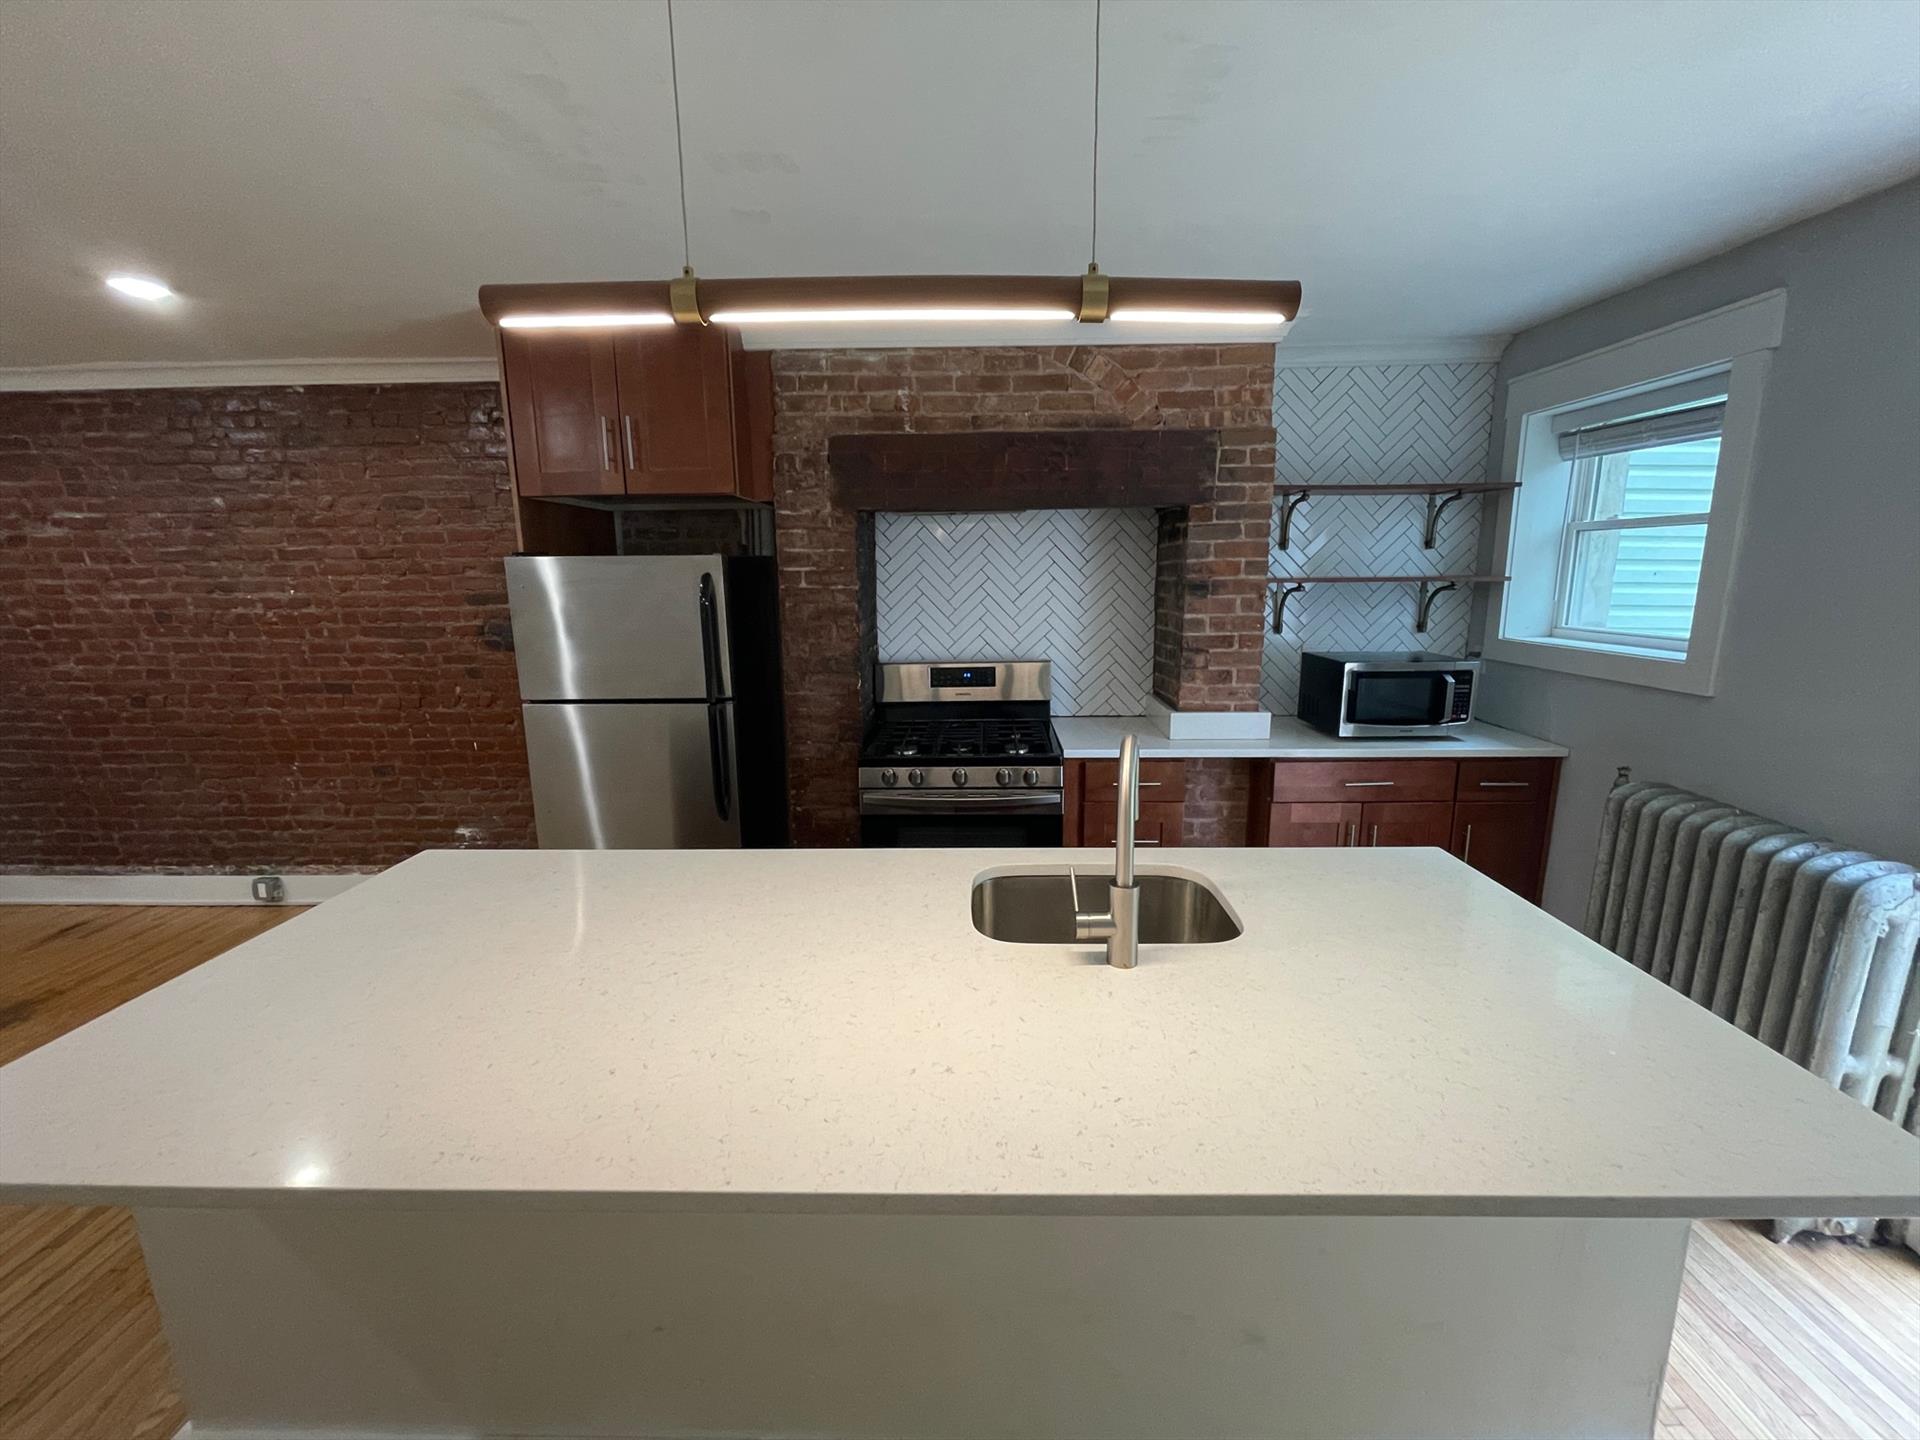 LANDLORD PAYS FEE! Welcome home to this spacious 1 bedroom layout! Unit features: exposed brick, hardwood floors, granite countertops & stainless steel appliances. Available June 1st. Backyard will be completely cleaned up with a new fence installed.